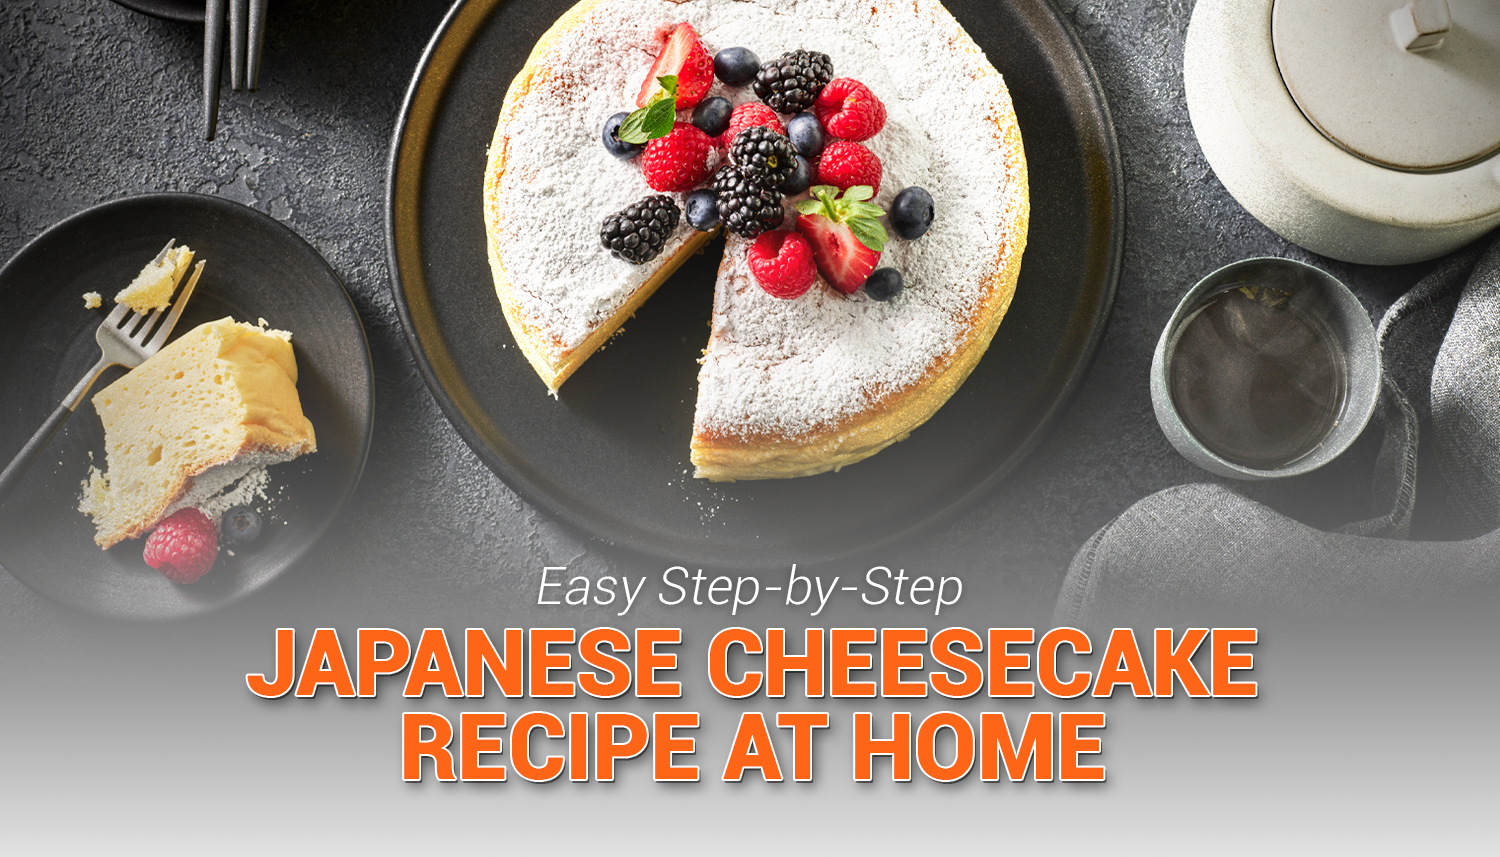 Easy Step-by-Step Japanese Cheesecake Recipe At Home